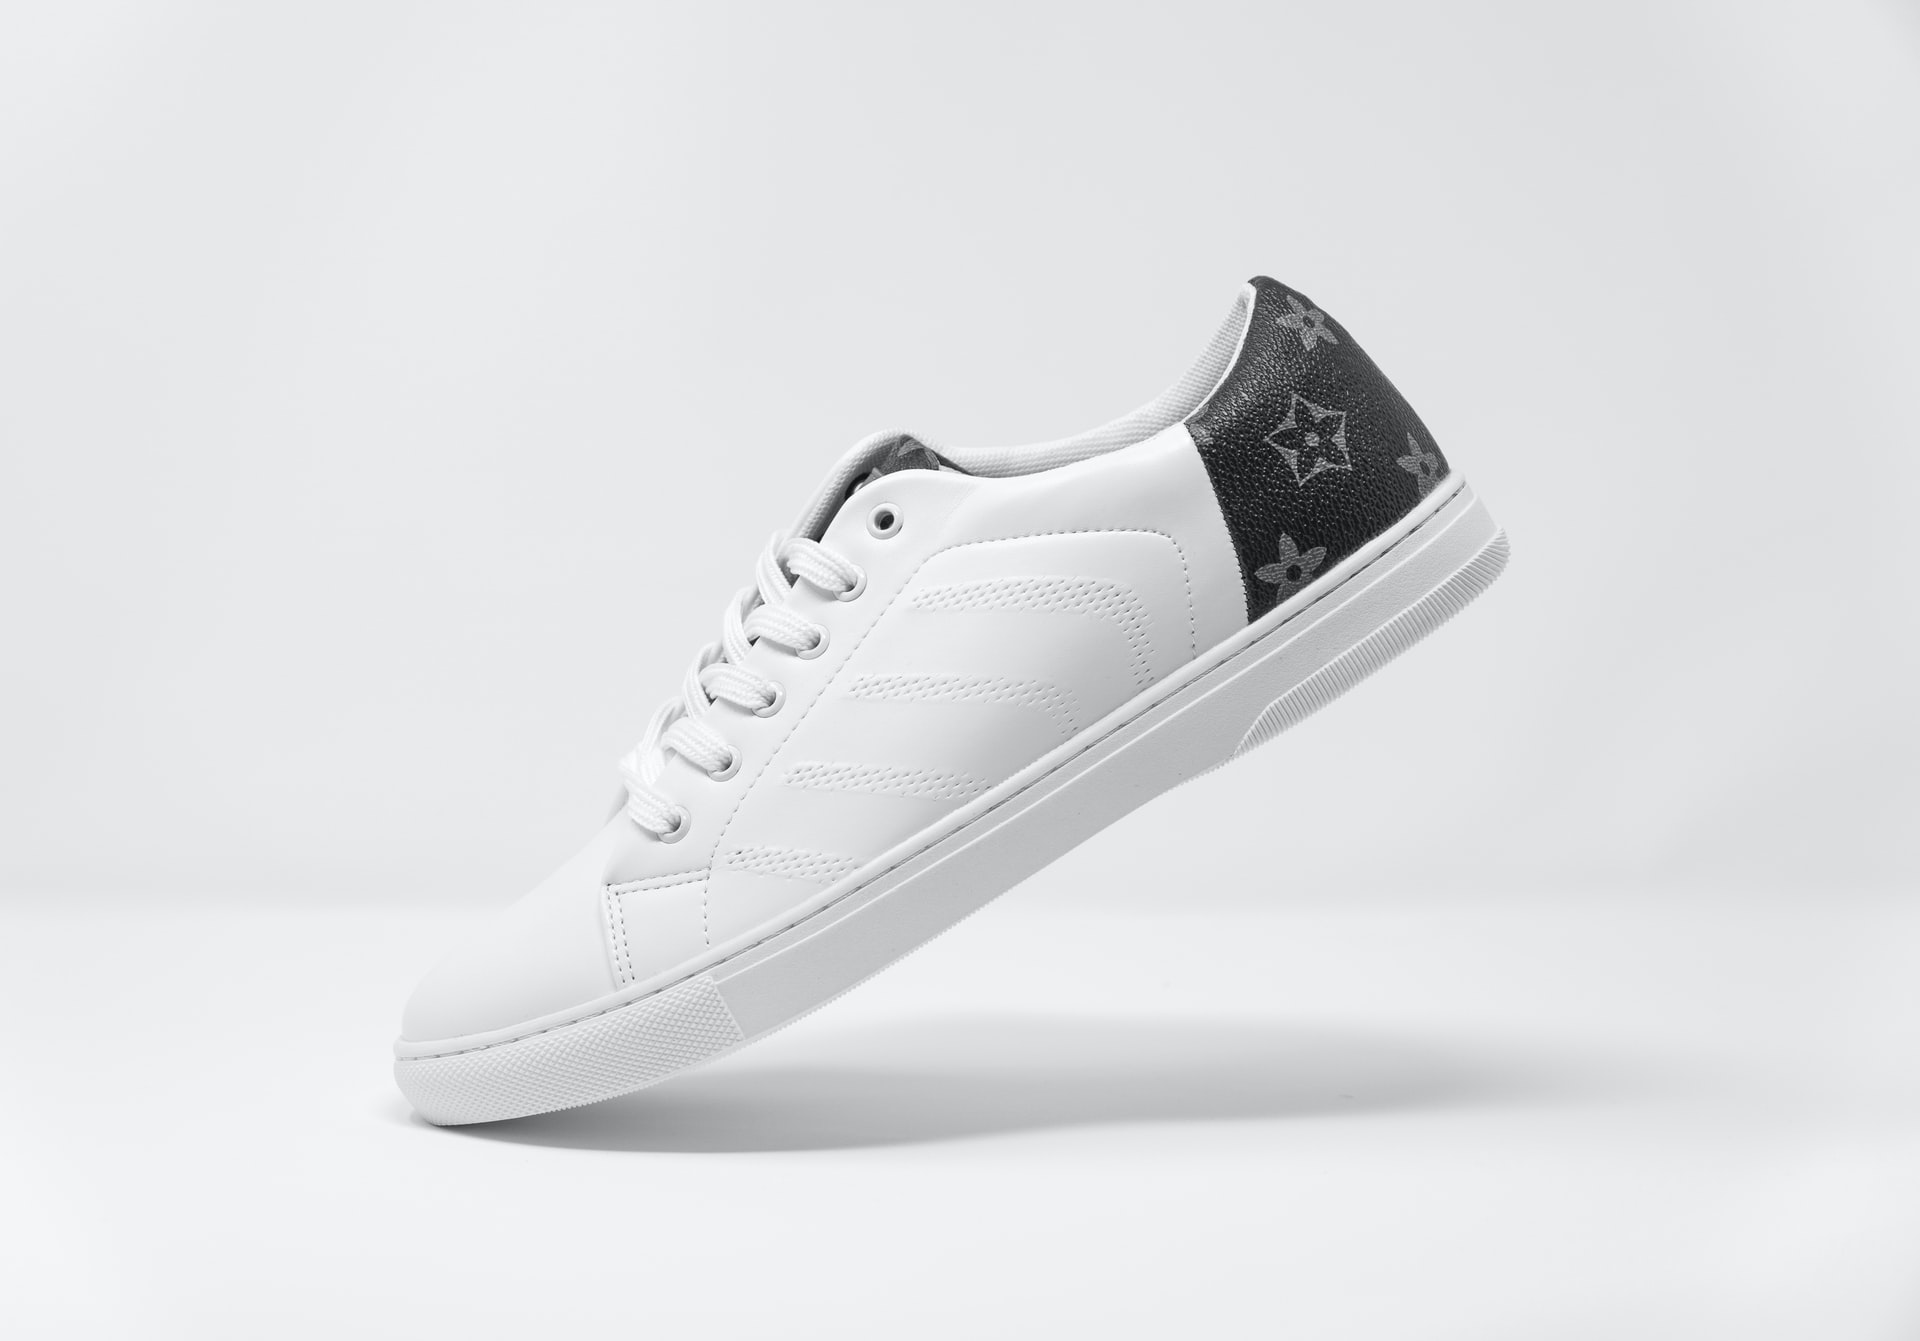 White sneaker on white background projecting a shadow